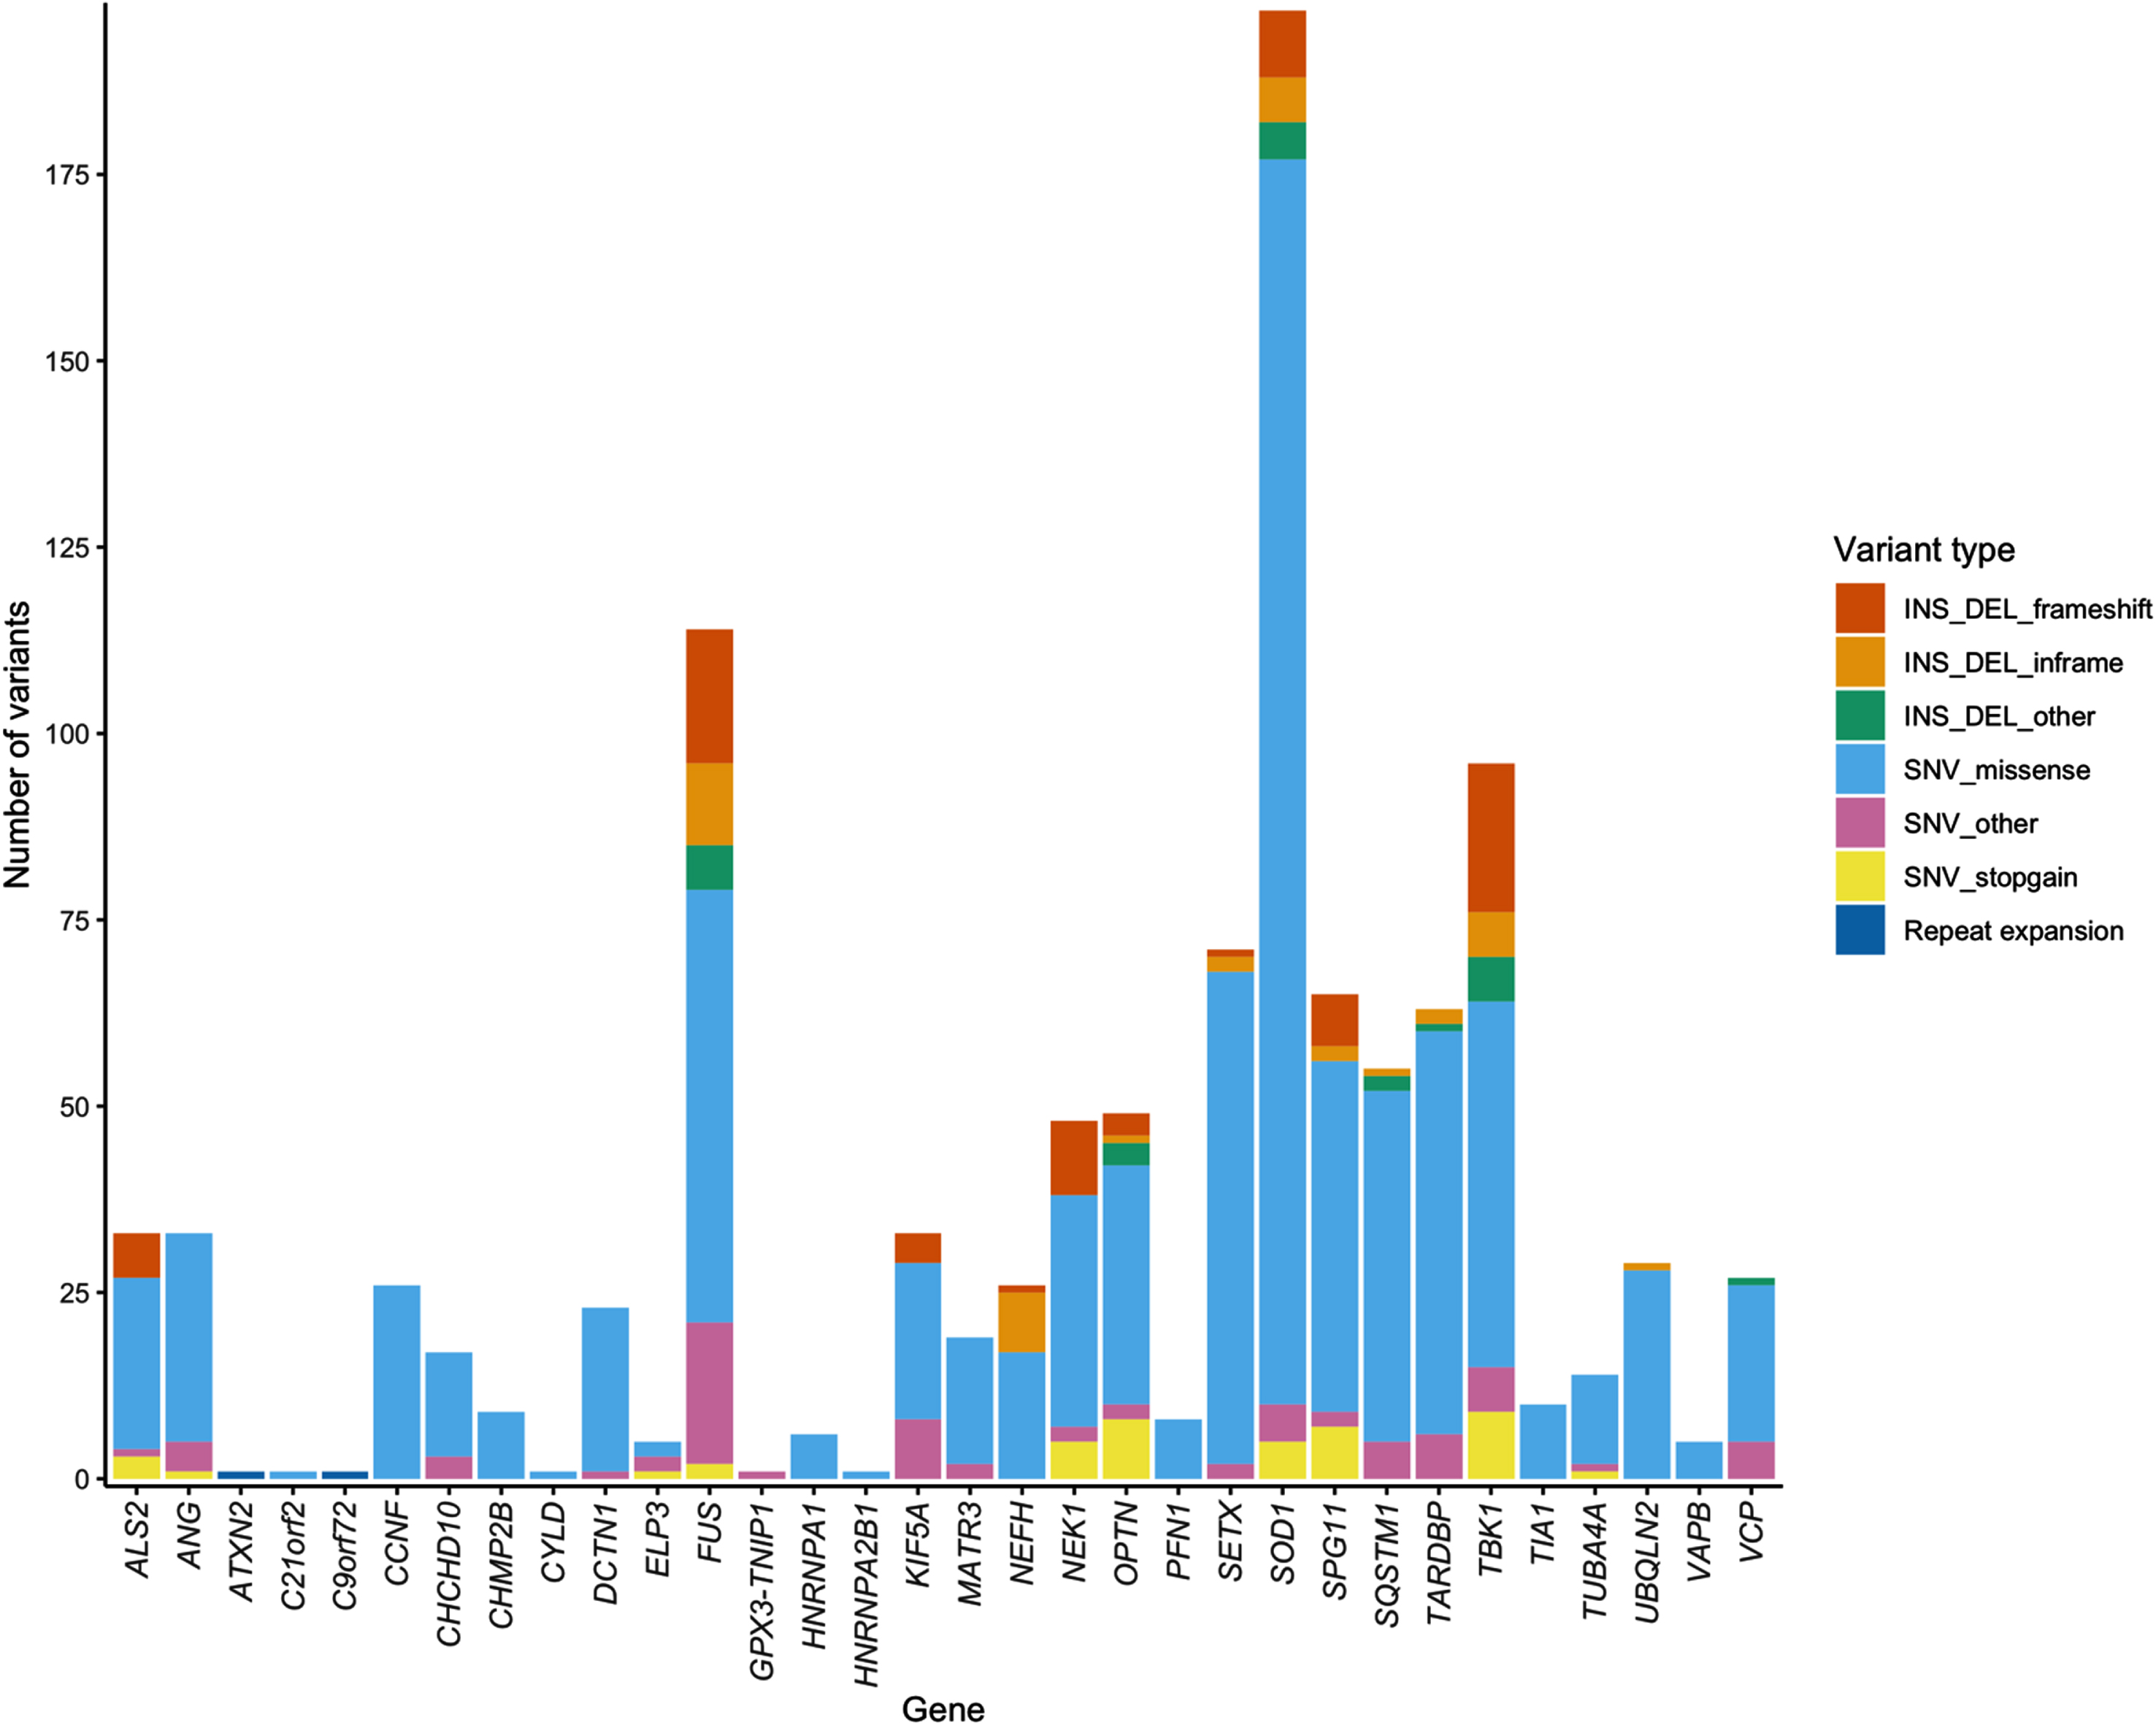 Stacked bar chart of variant types in each ALS gene.